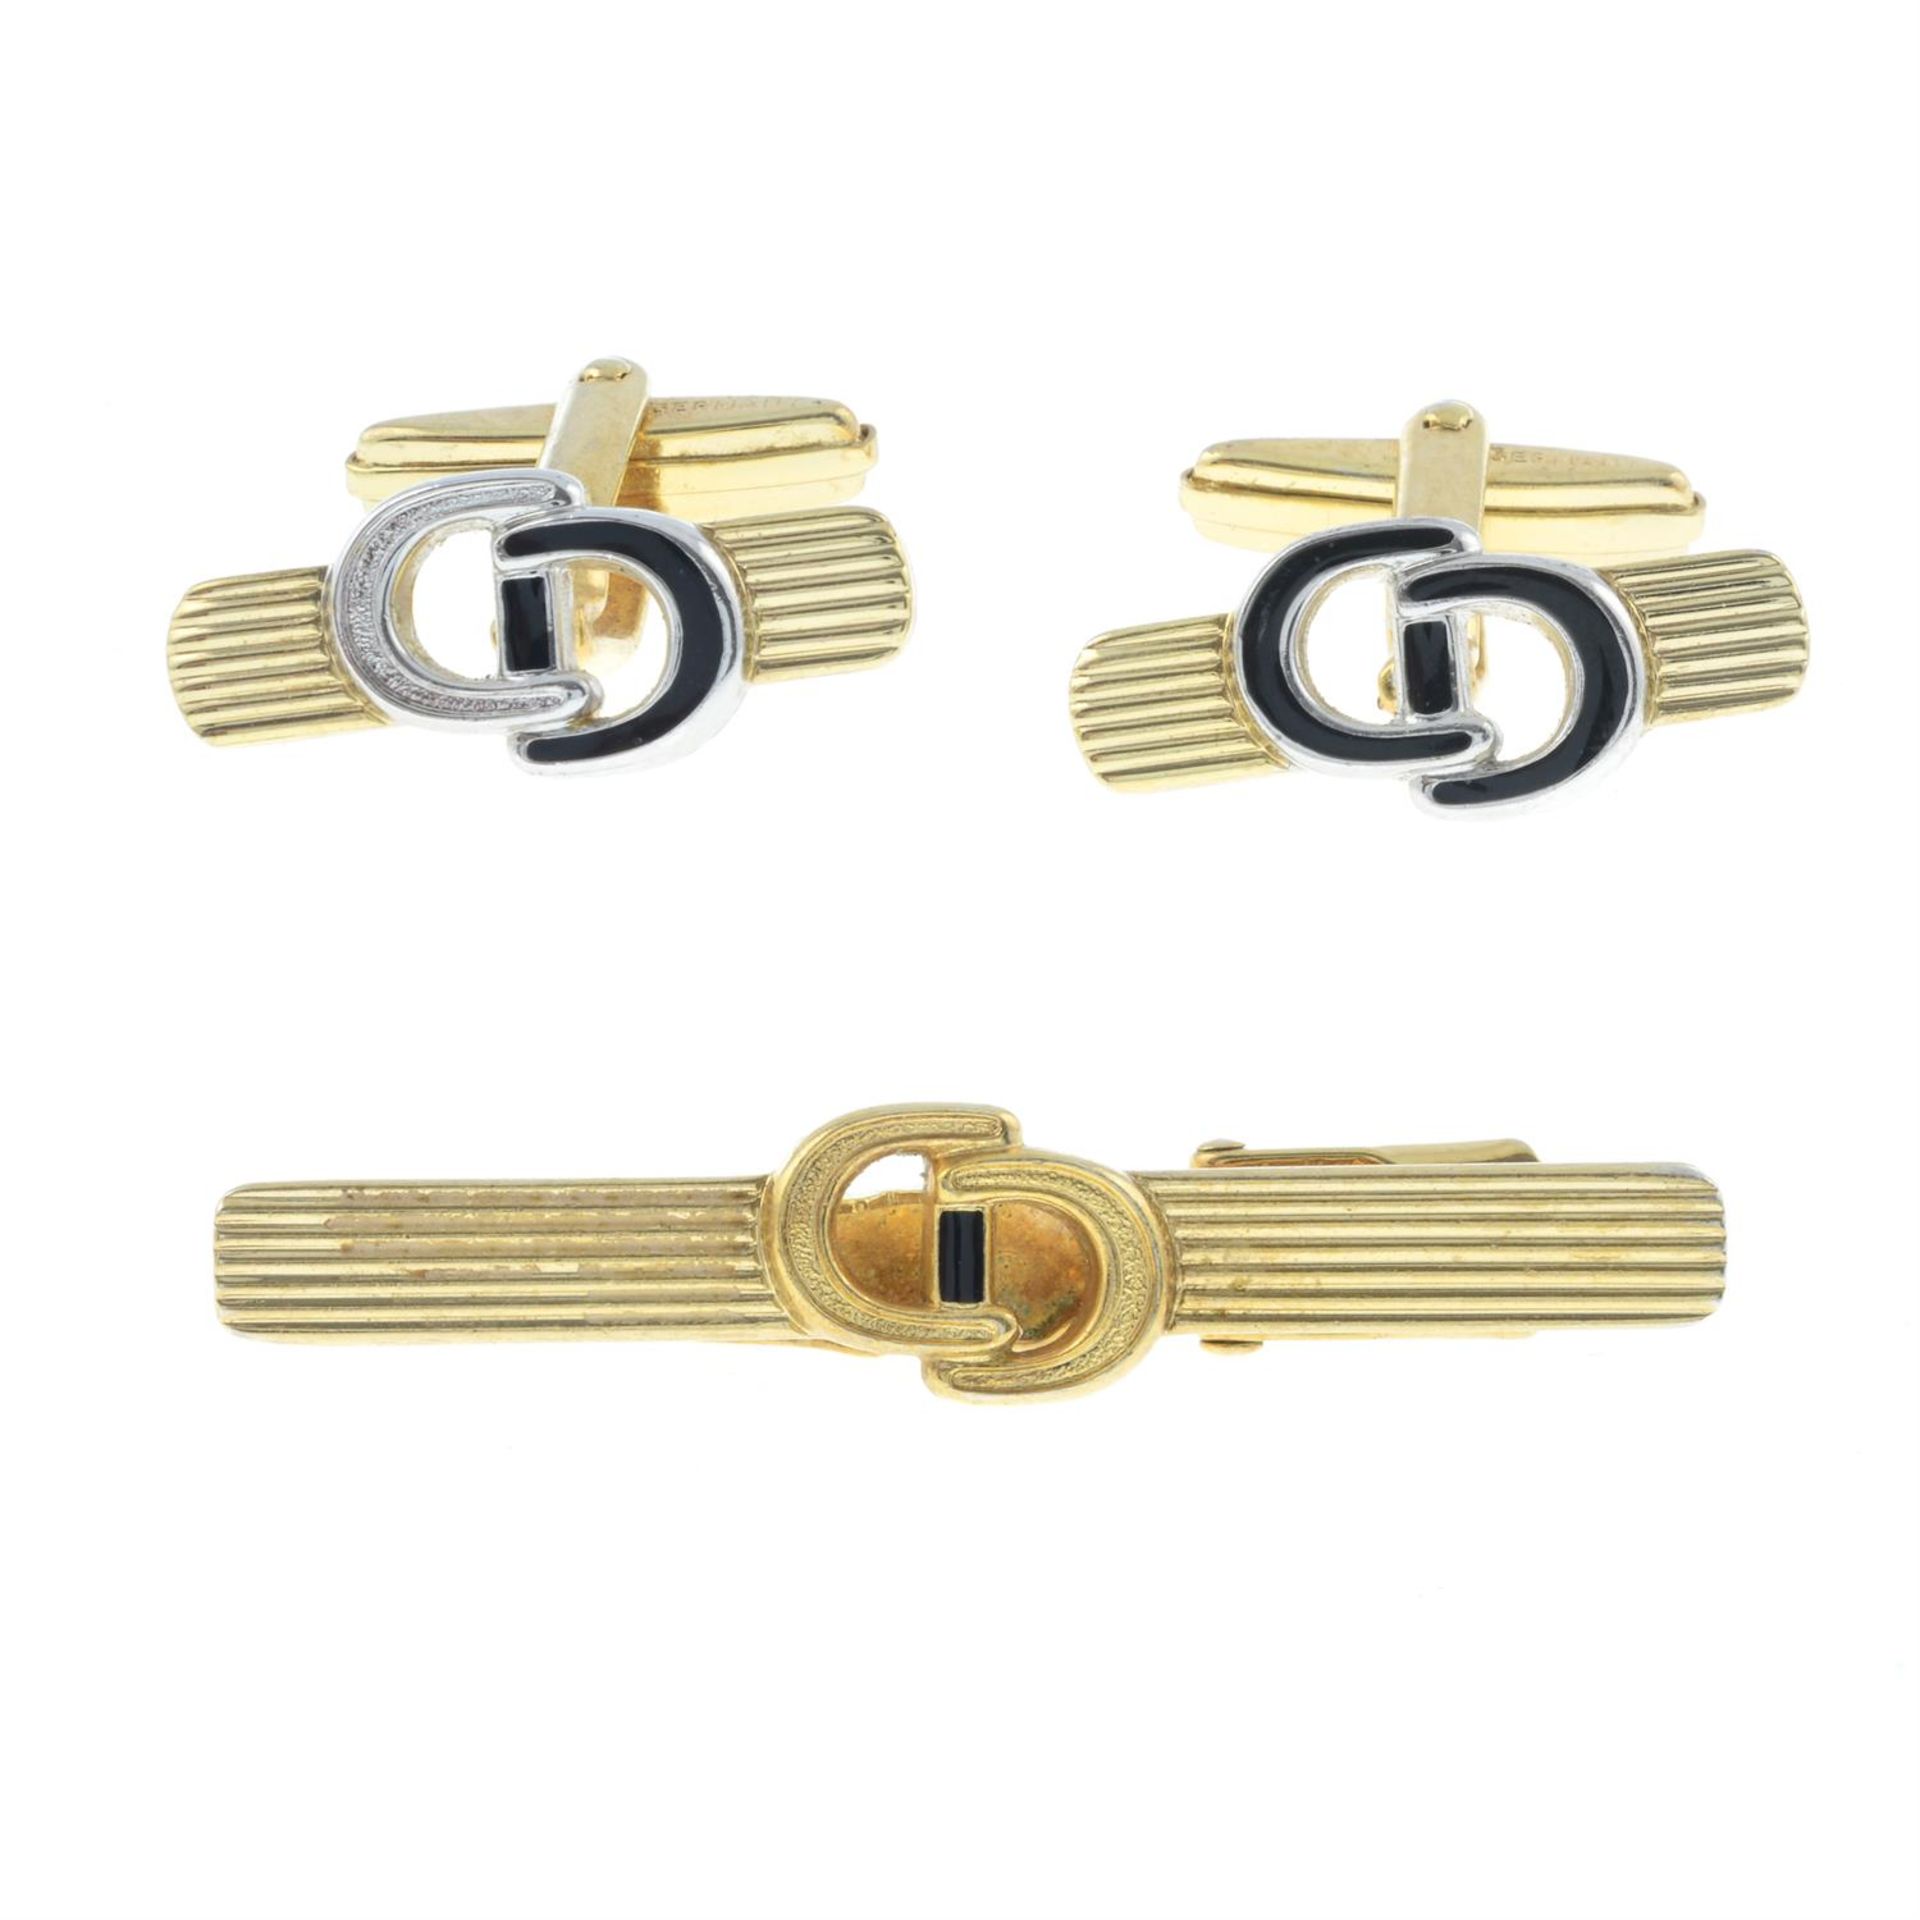 CHRISTIAN DIOR- a pair of cufflinks together with a tie clip.